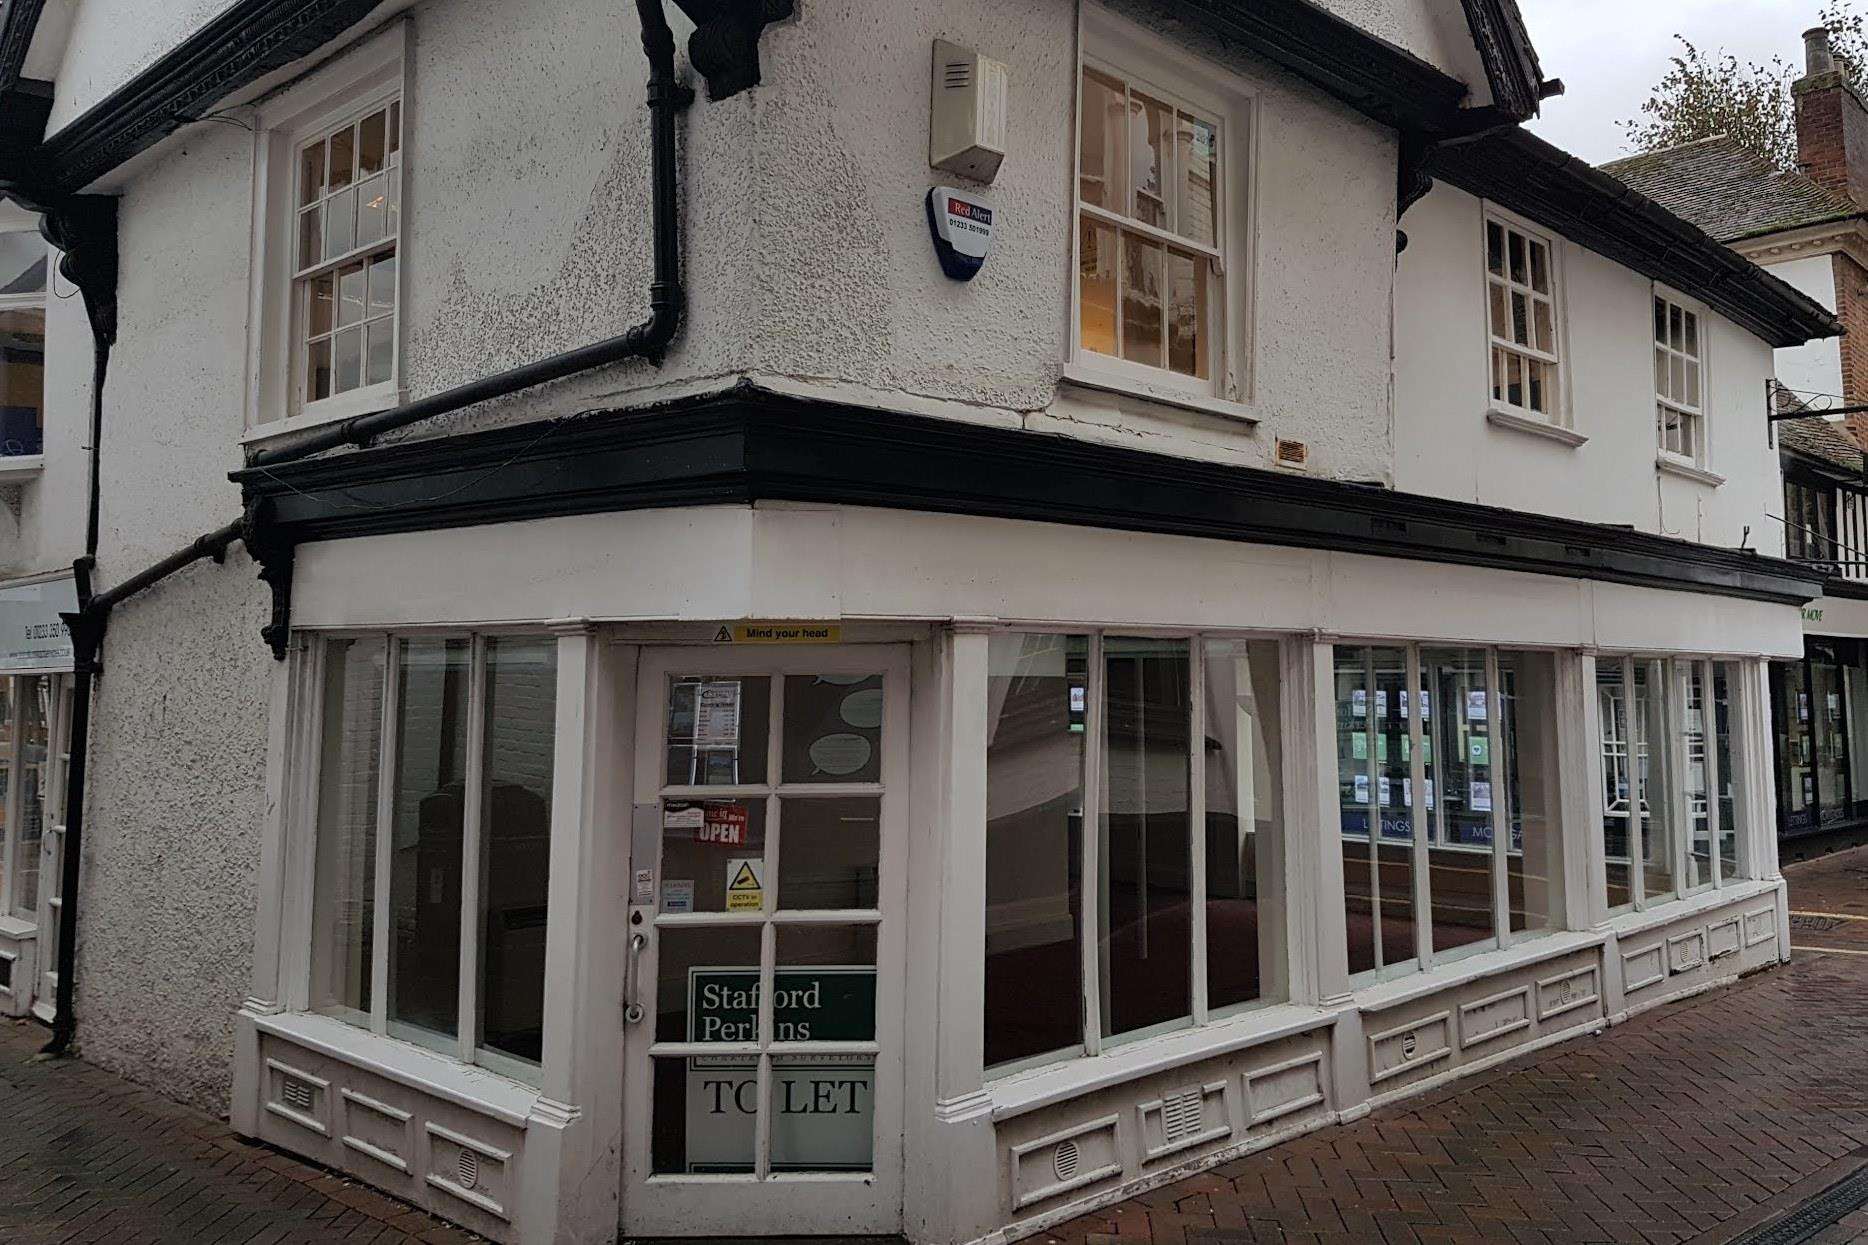 A former shop may soon become a wine bar if a change of use is approved